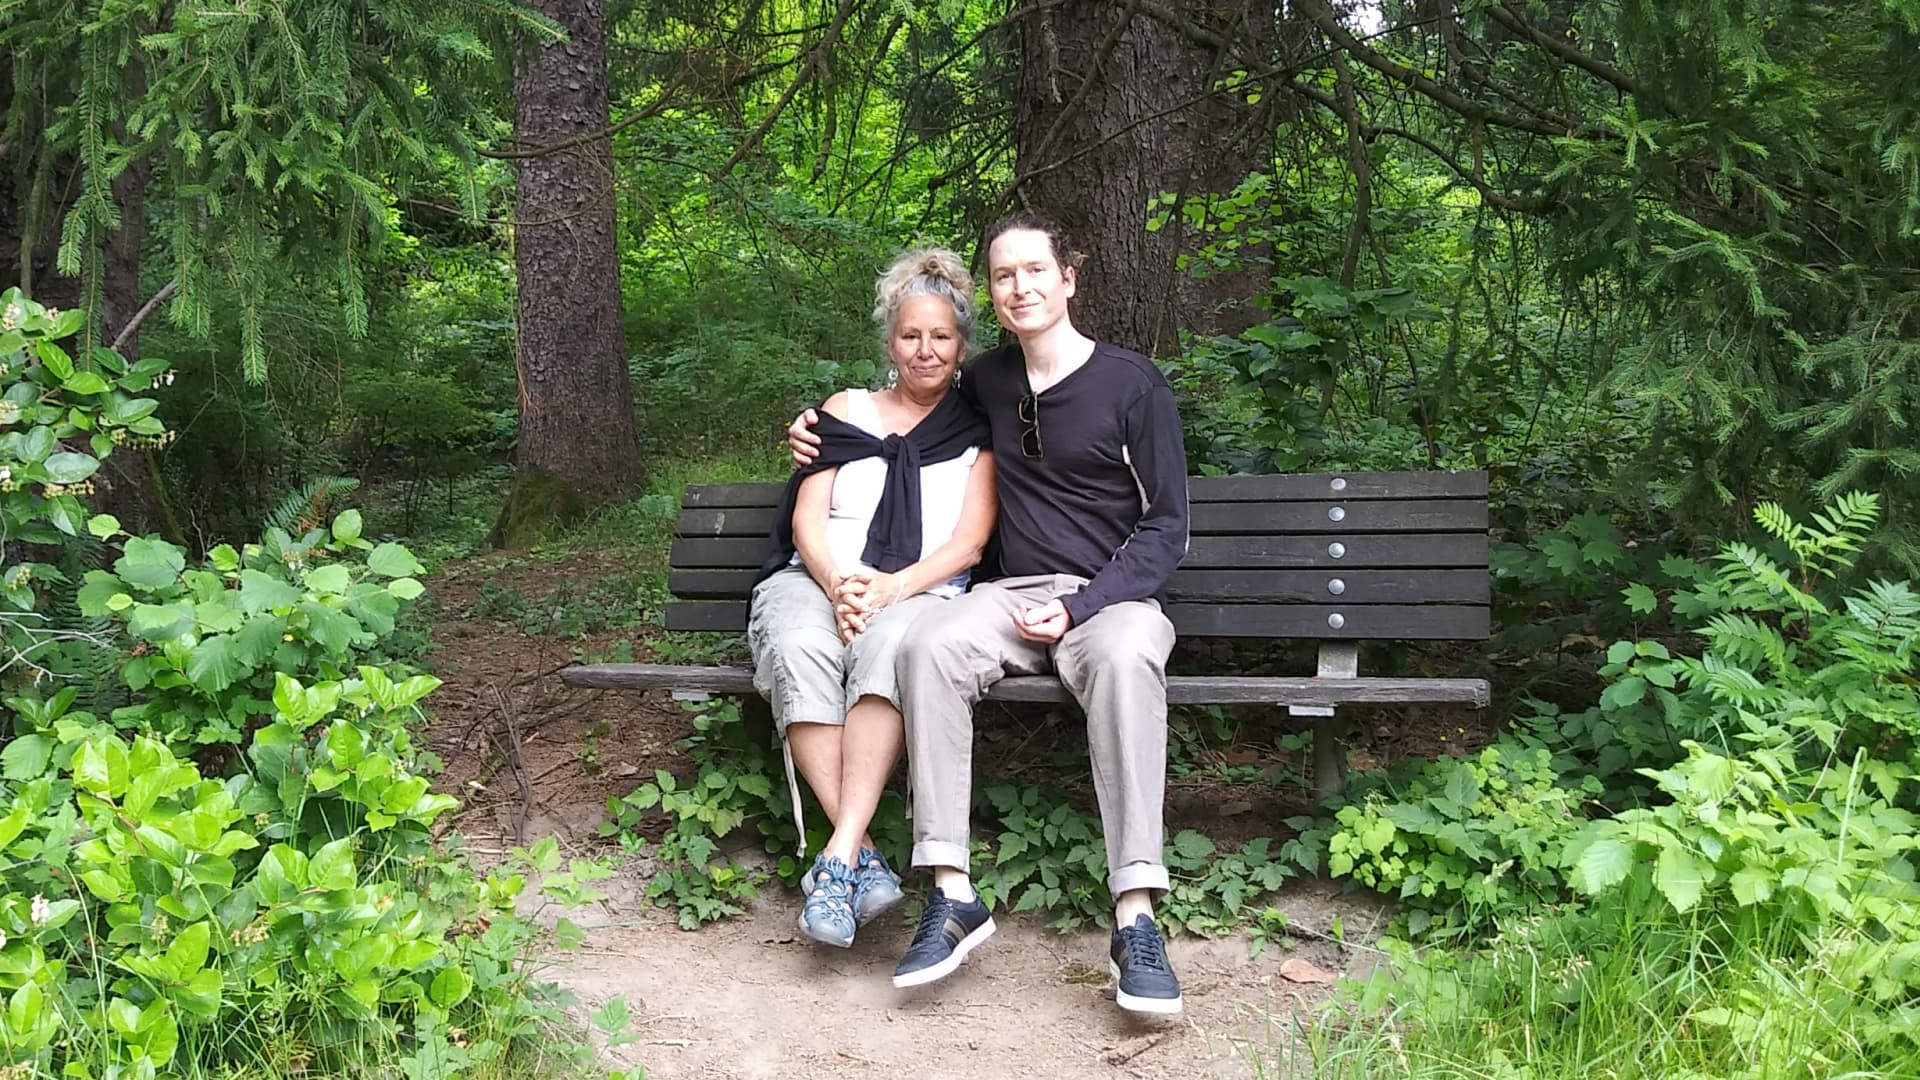 As I've gotten older, spending time with my adult children is more precious. Here, a trip to the Portland Arboretum in Portland, Oregon, with one of my sons.